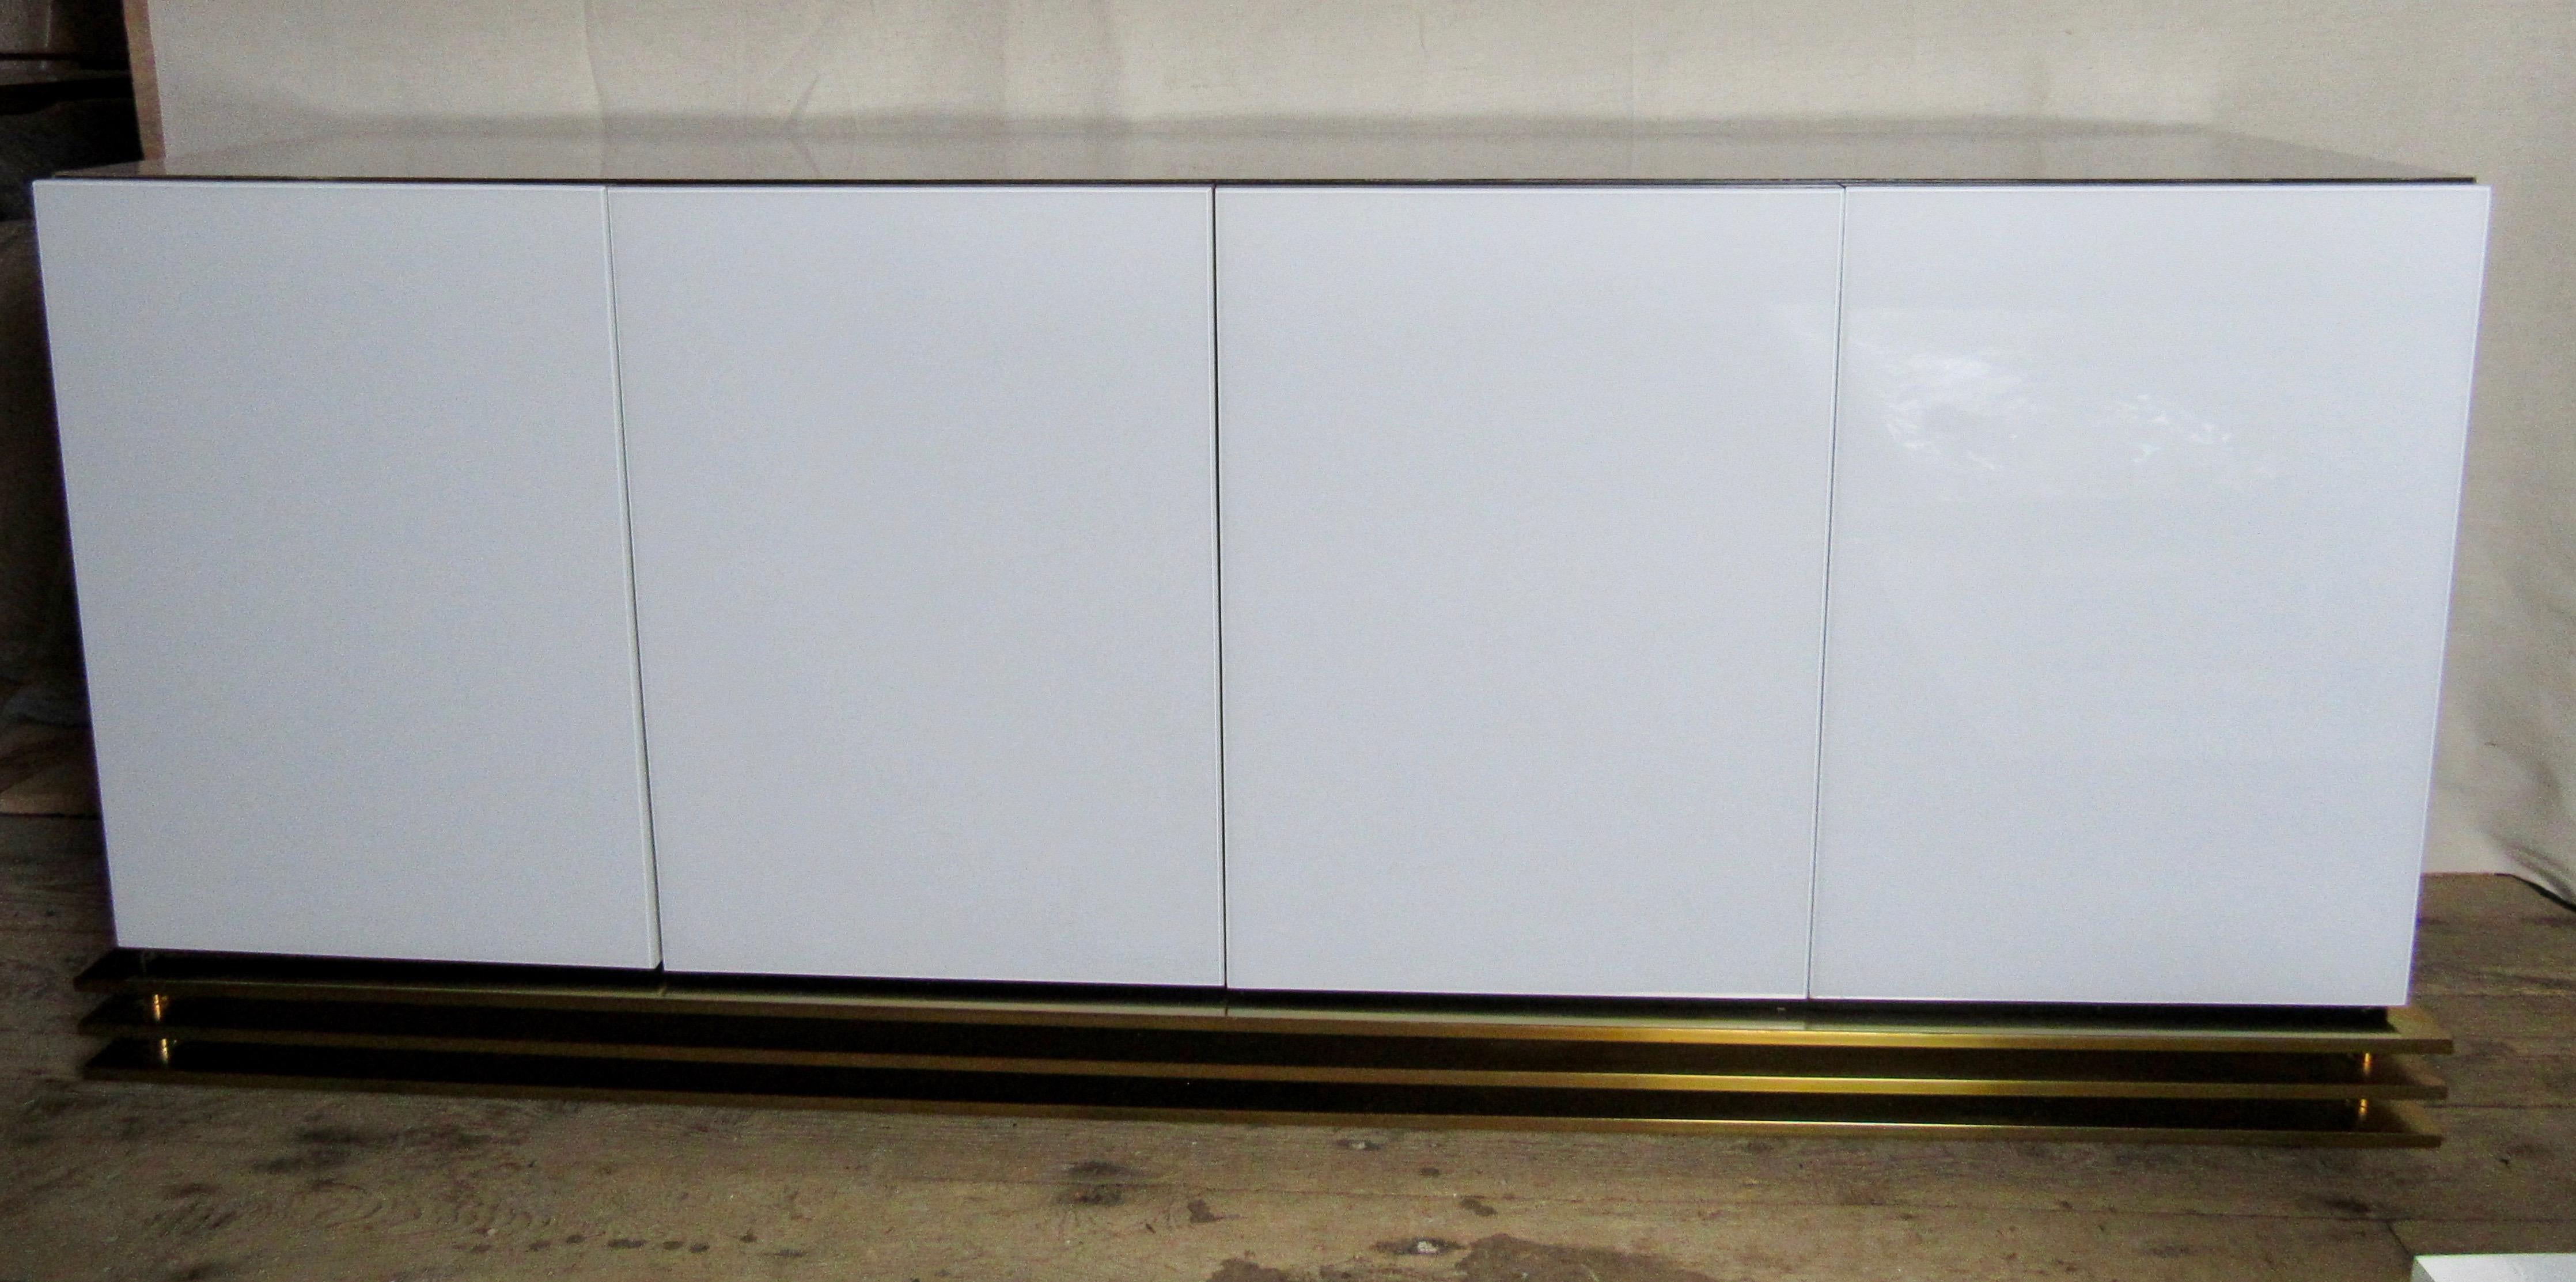 Minimalist white Lucite and white Formica four door sideboard credenza setback on a triple banded base. Black interior with two glass shelves. Milo Baughman style design.